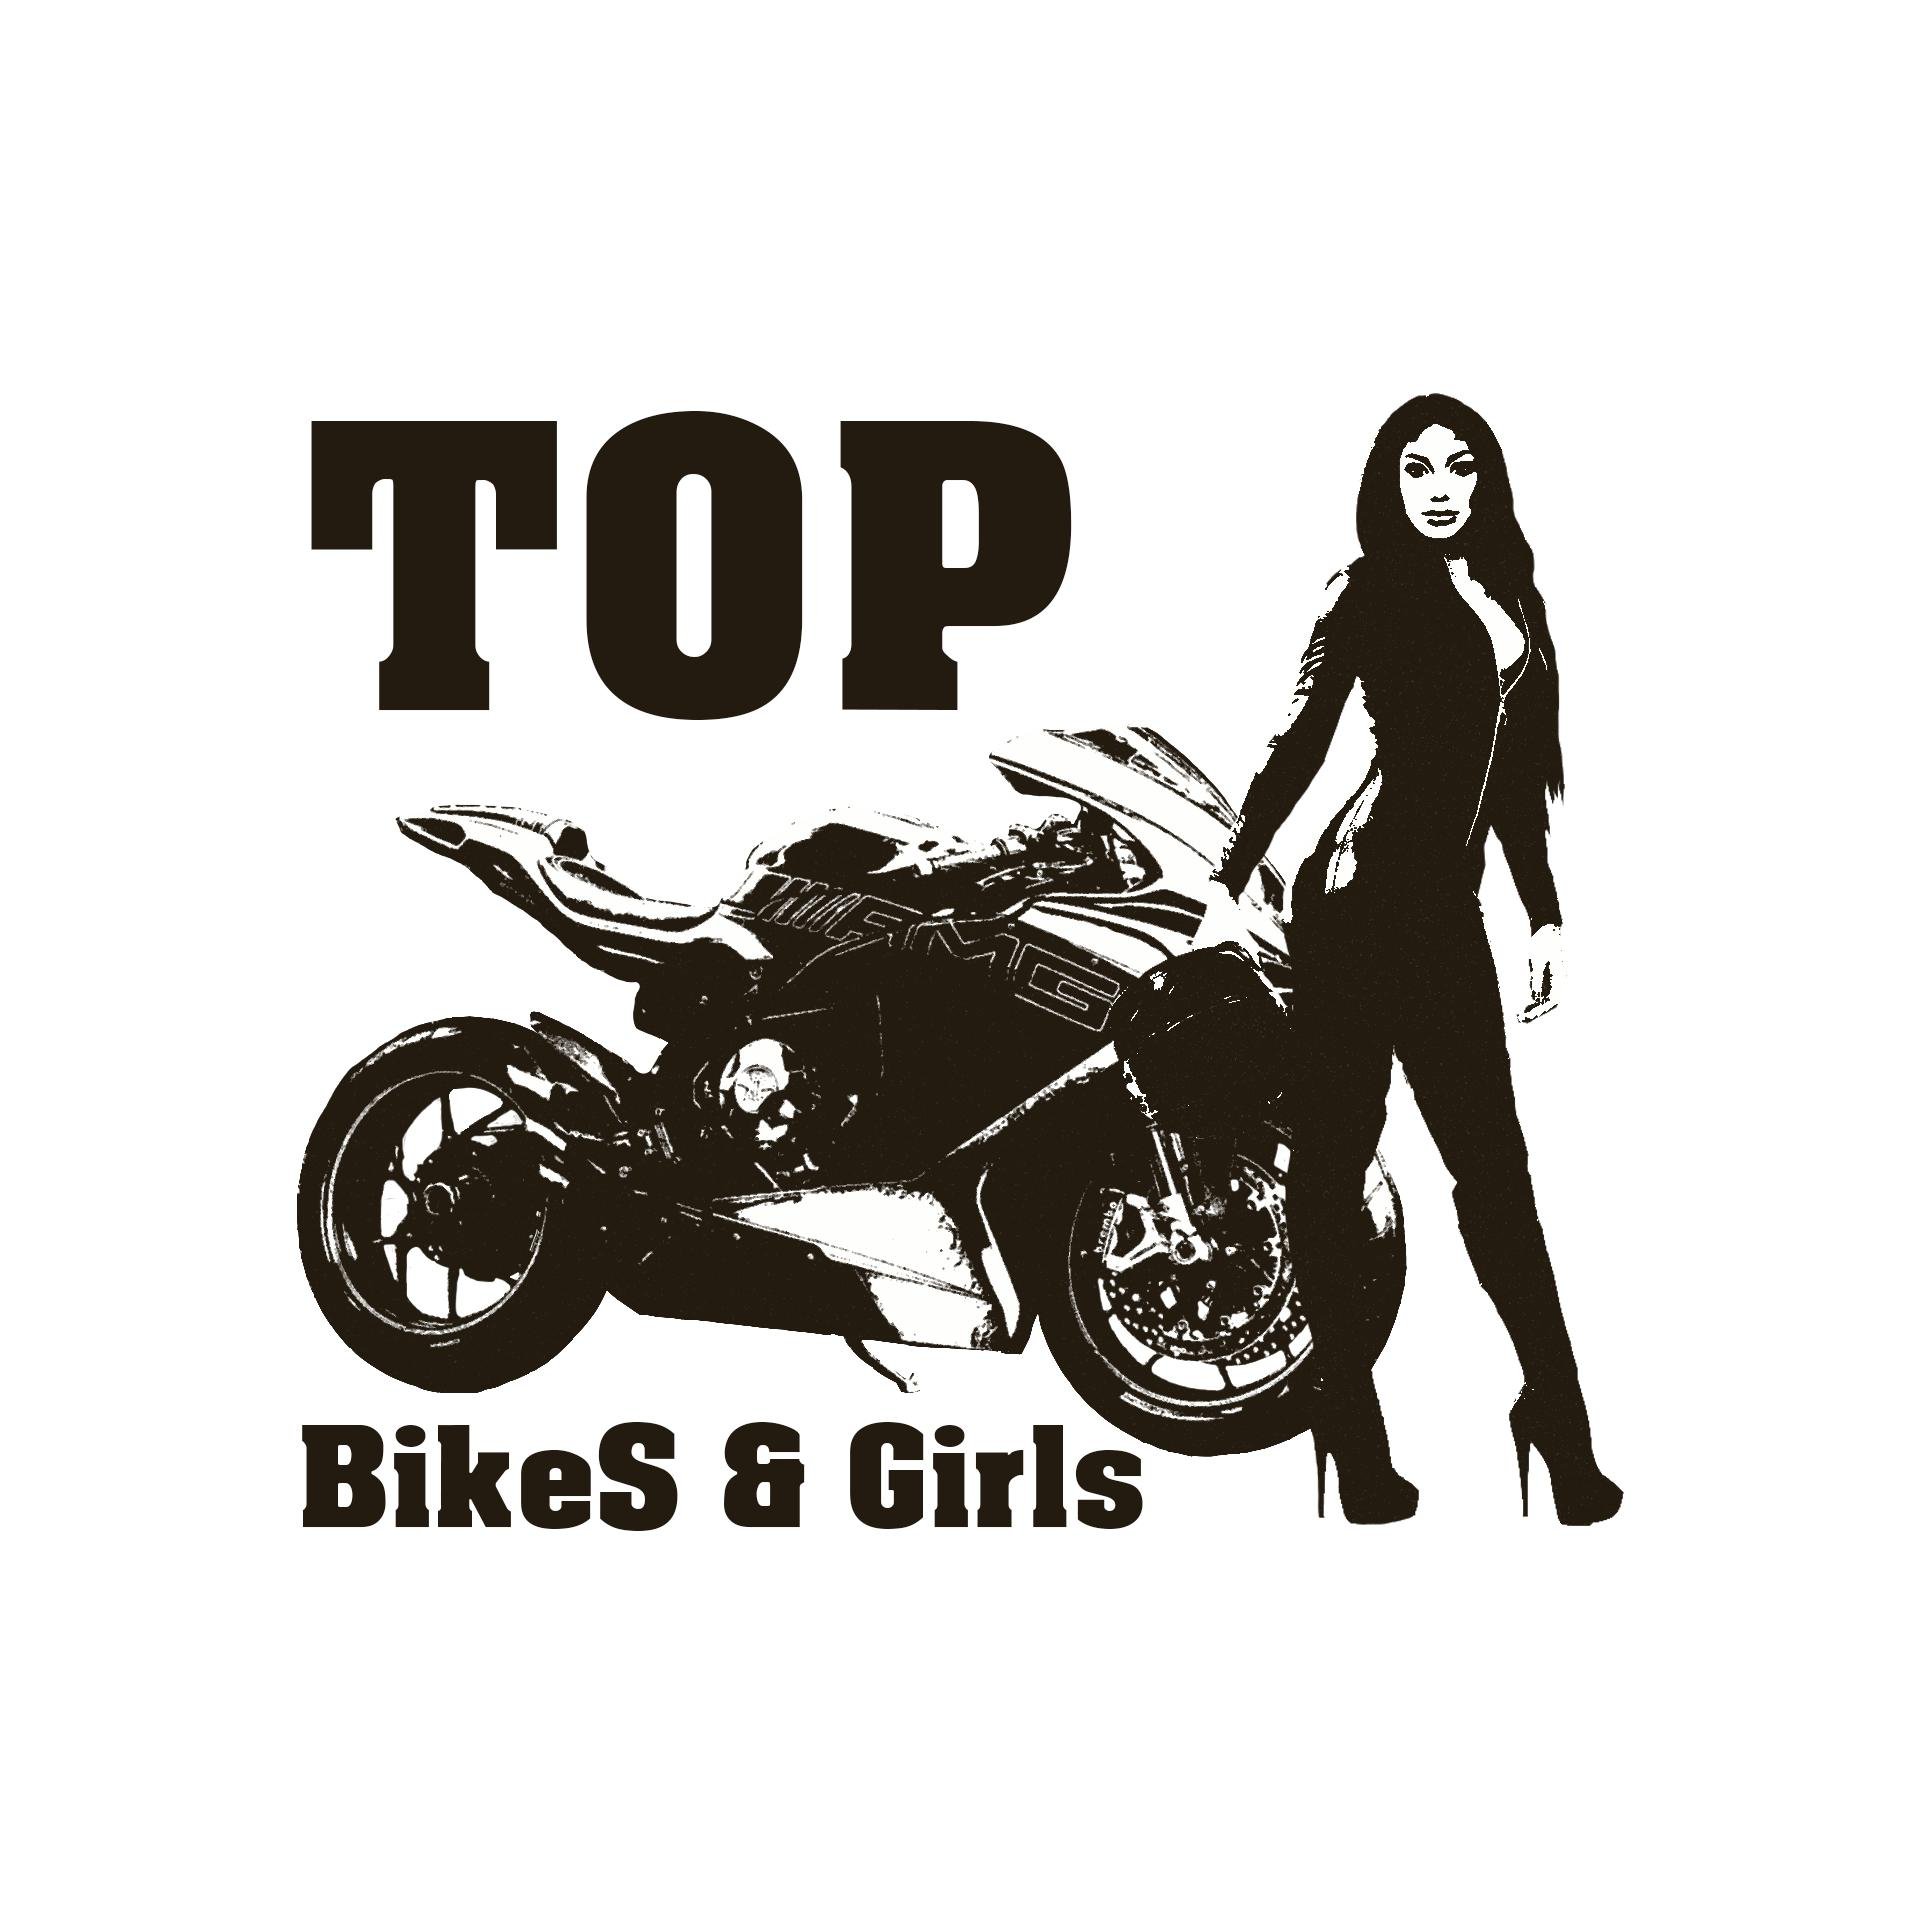 Top bikes and girls